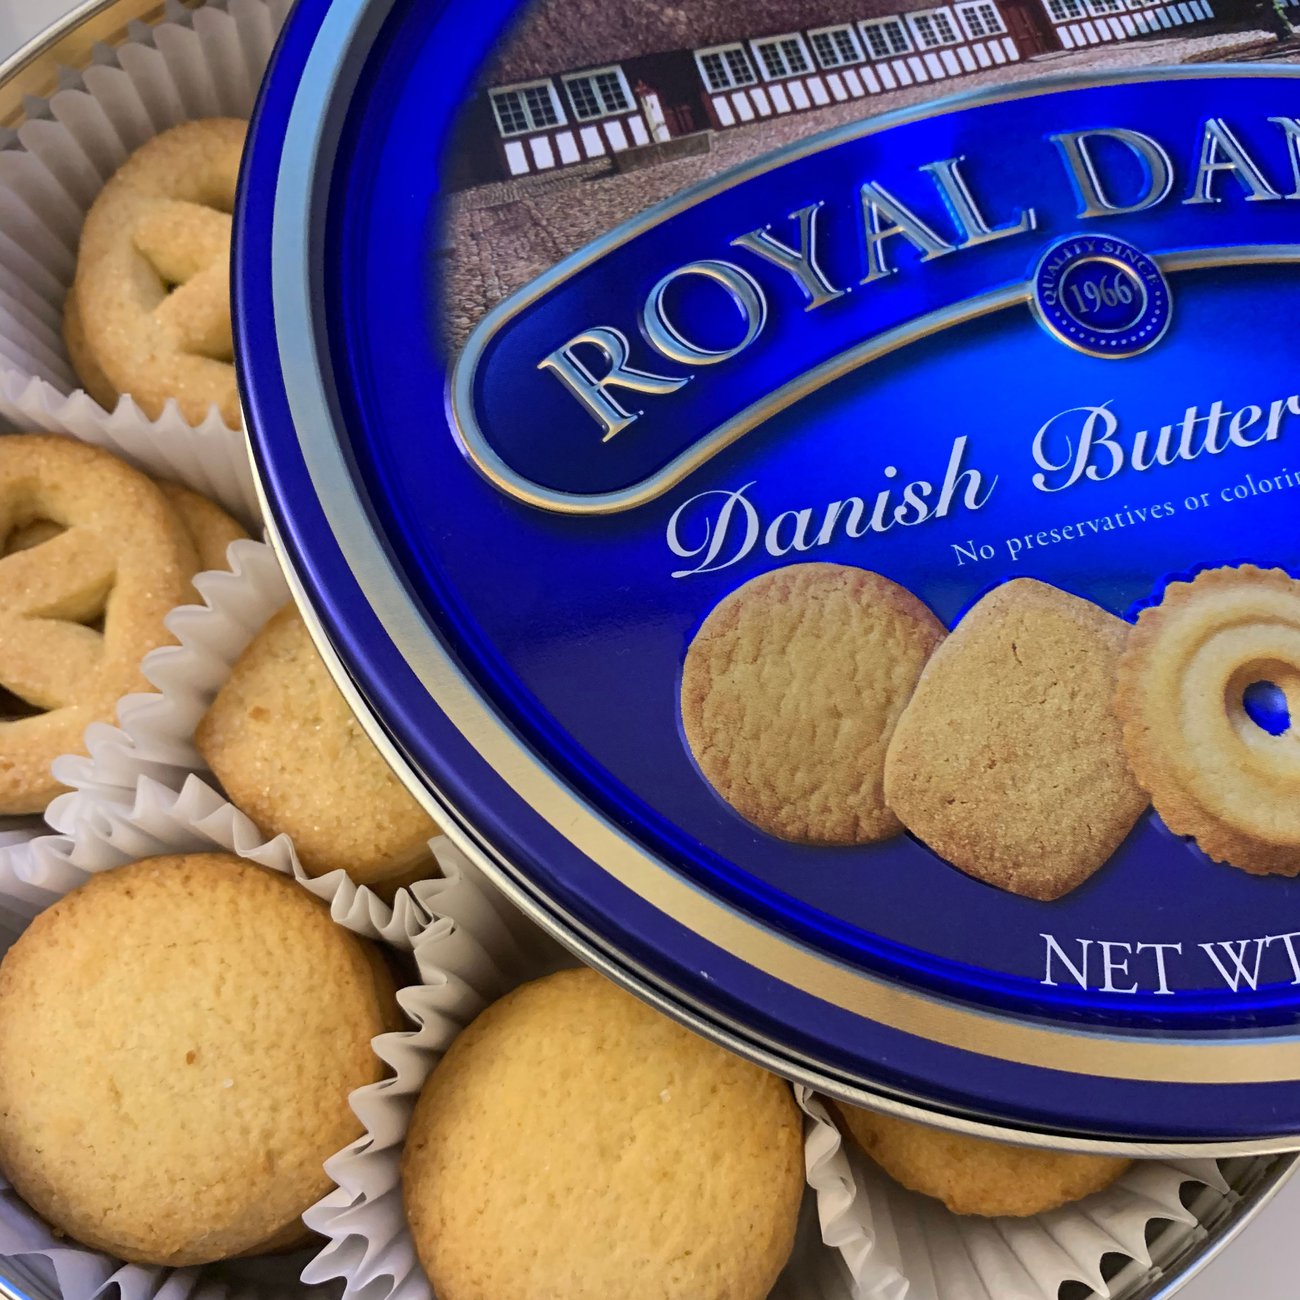 Royal Dansk's butter biscuits in a tin